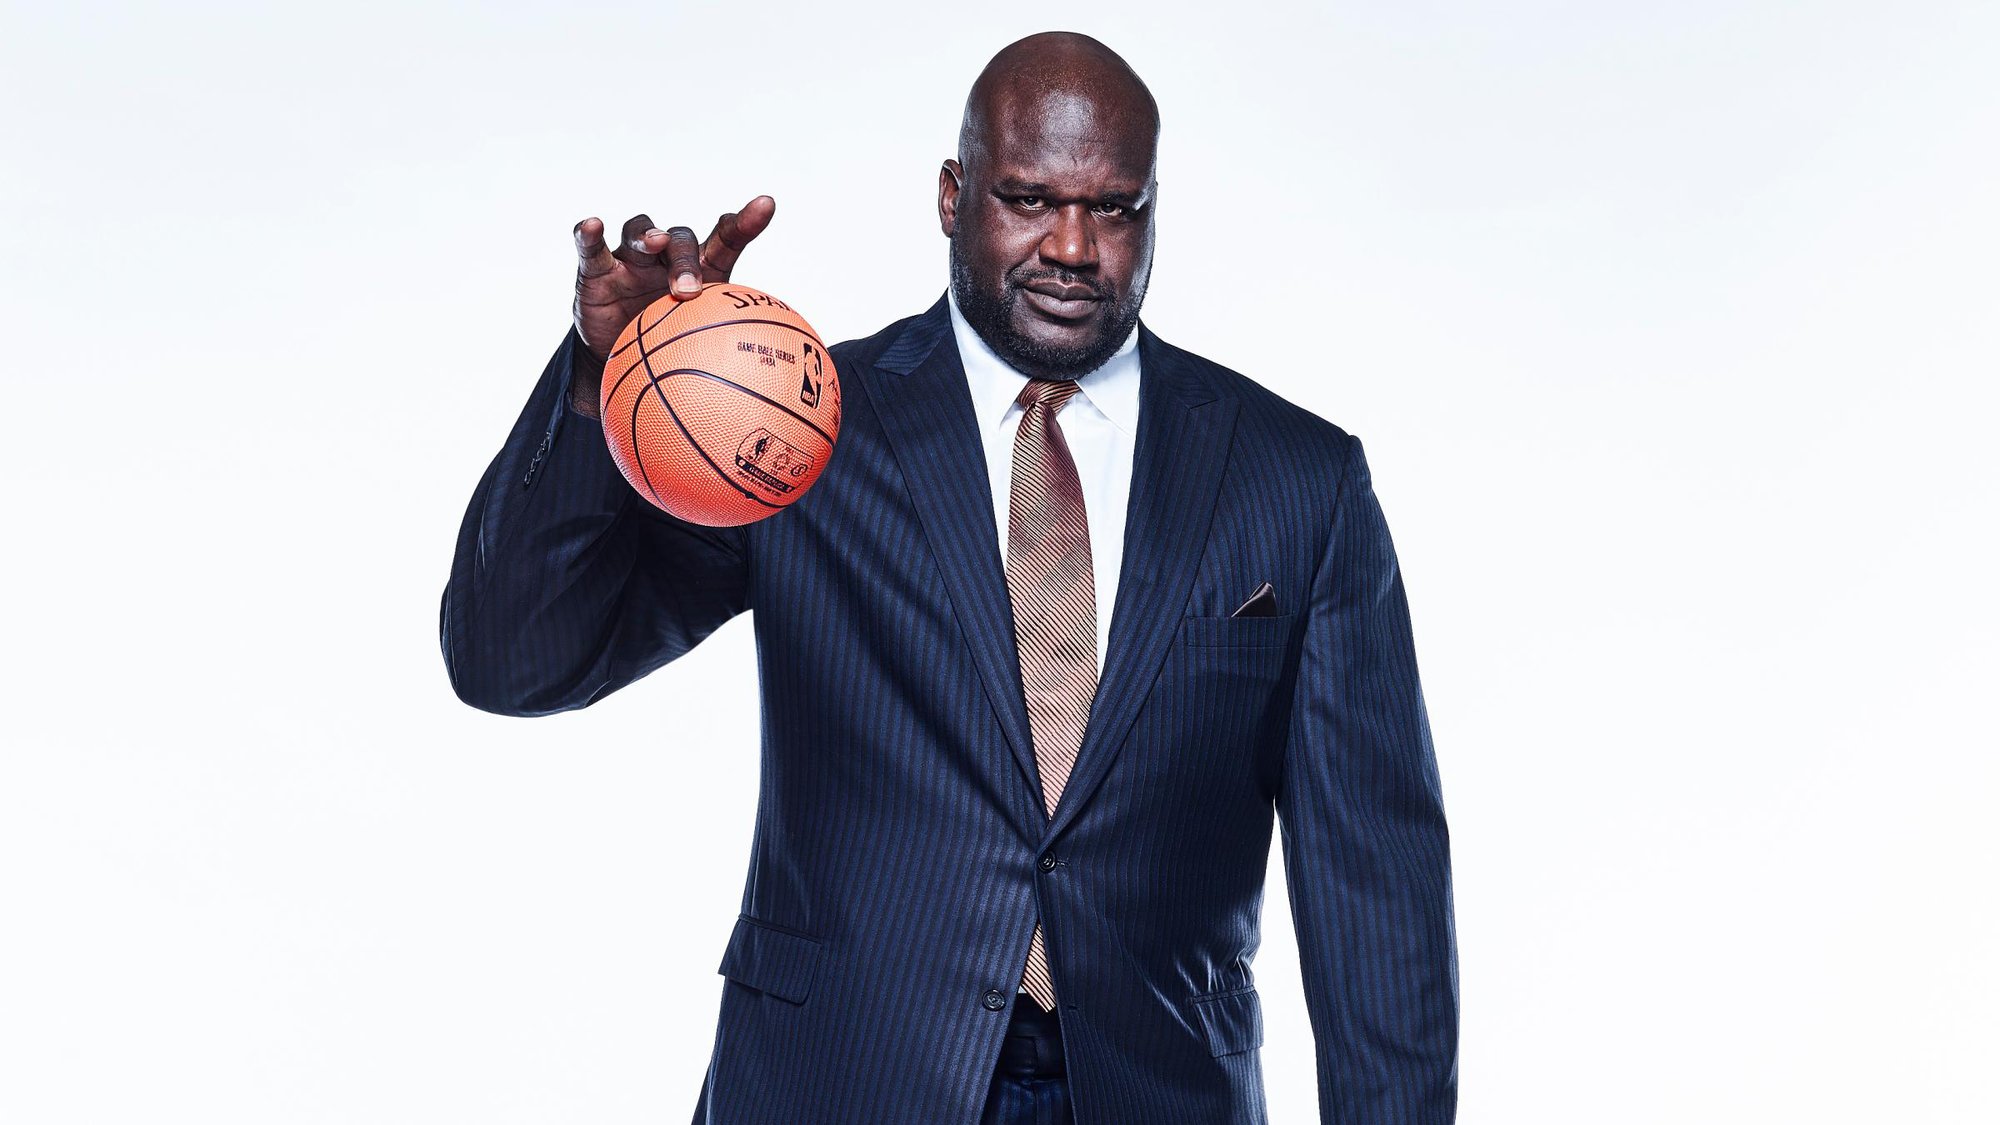 Shaquille O'Neal plays with a small basketball